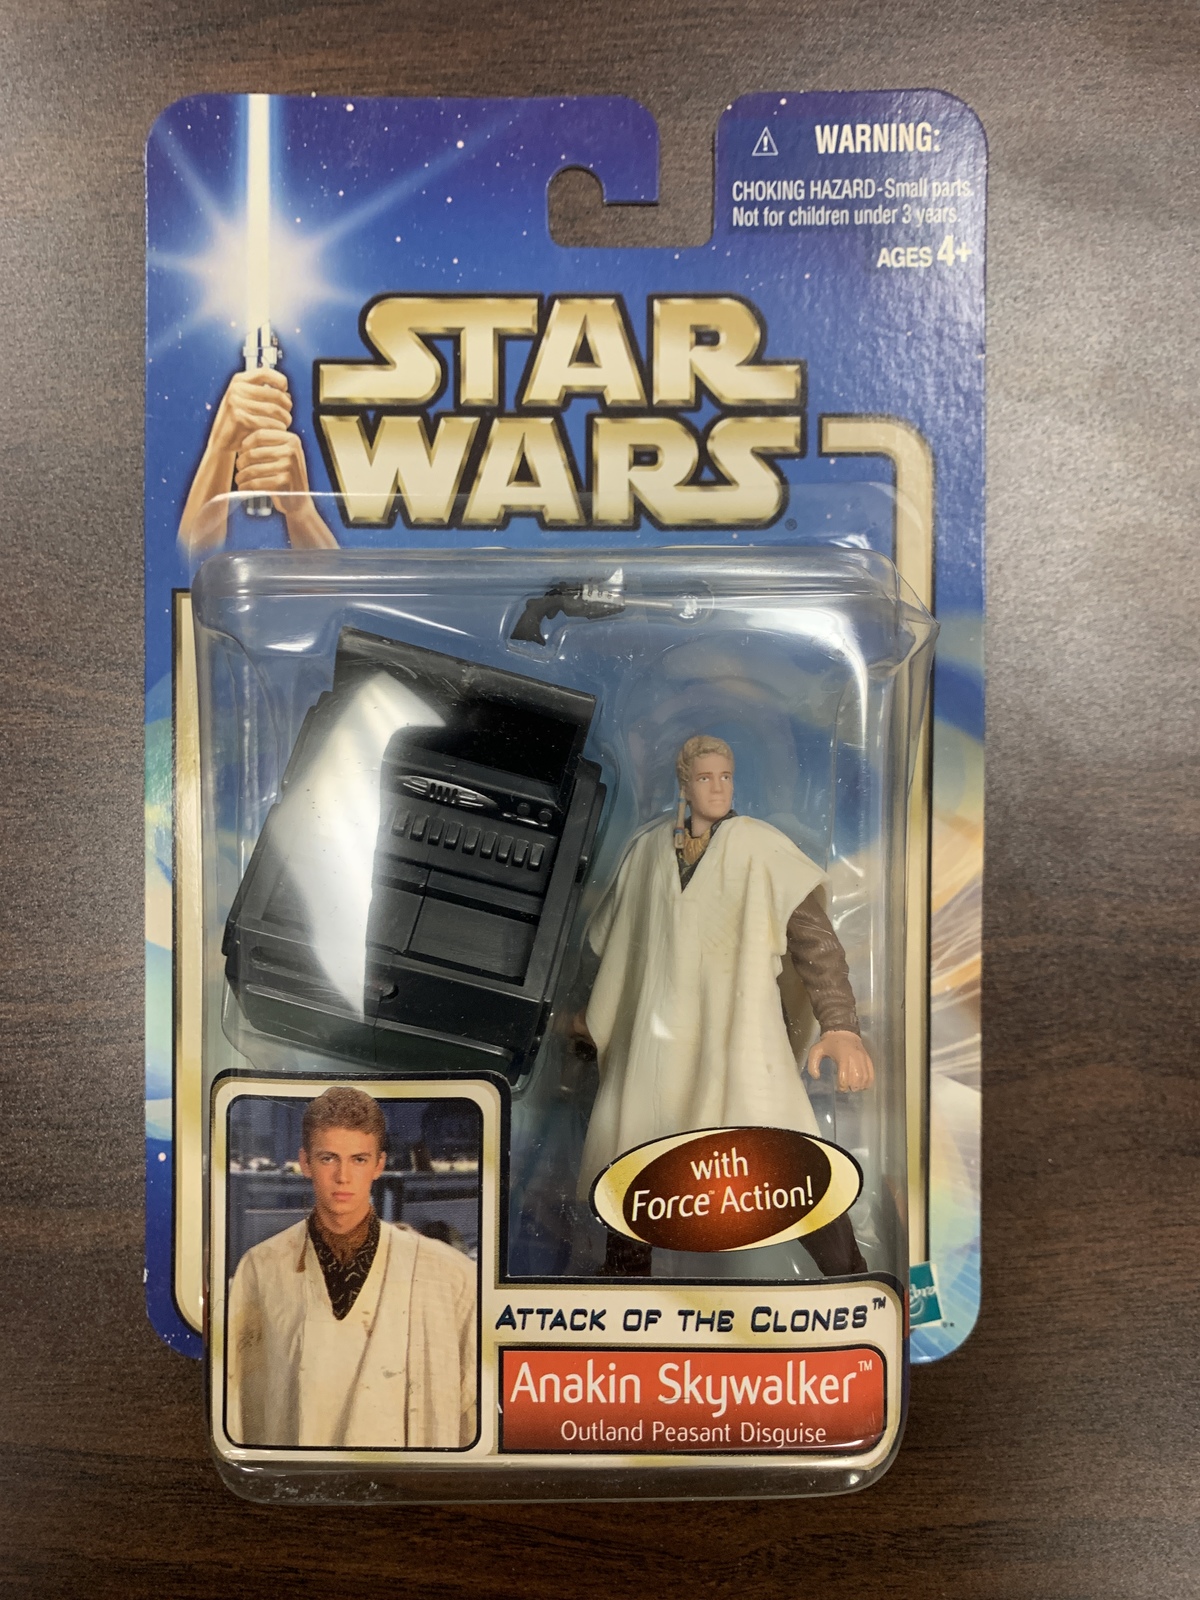 Primary image for Star Wars unsigned Anakin Skywalker action figure